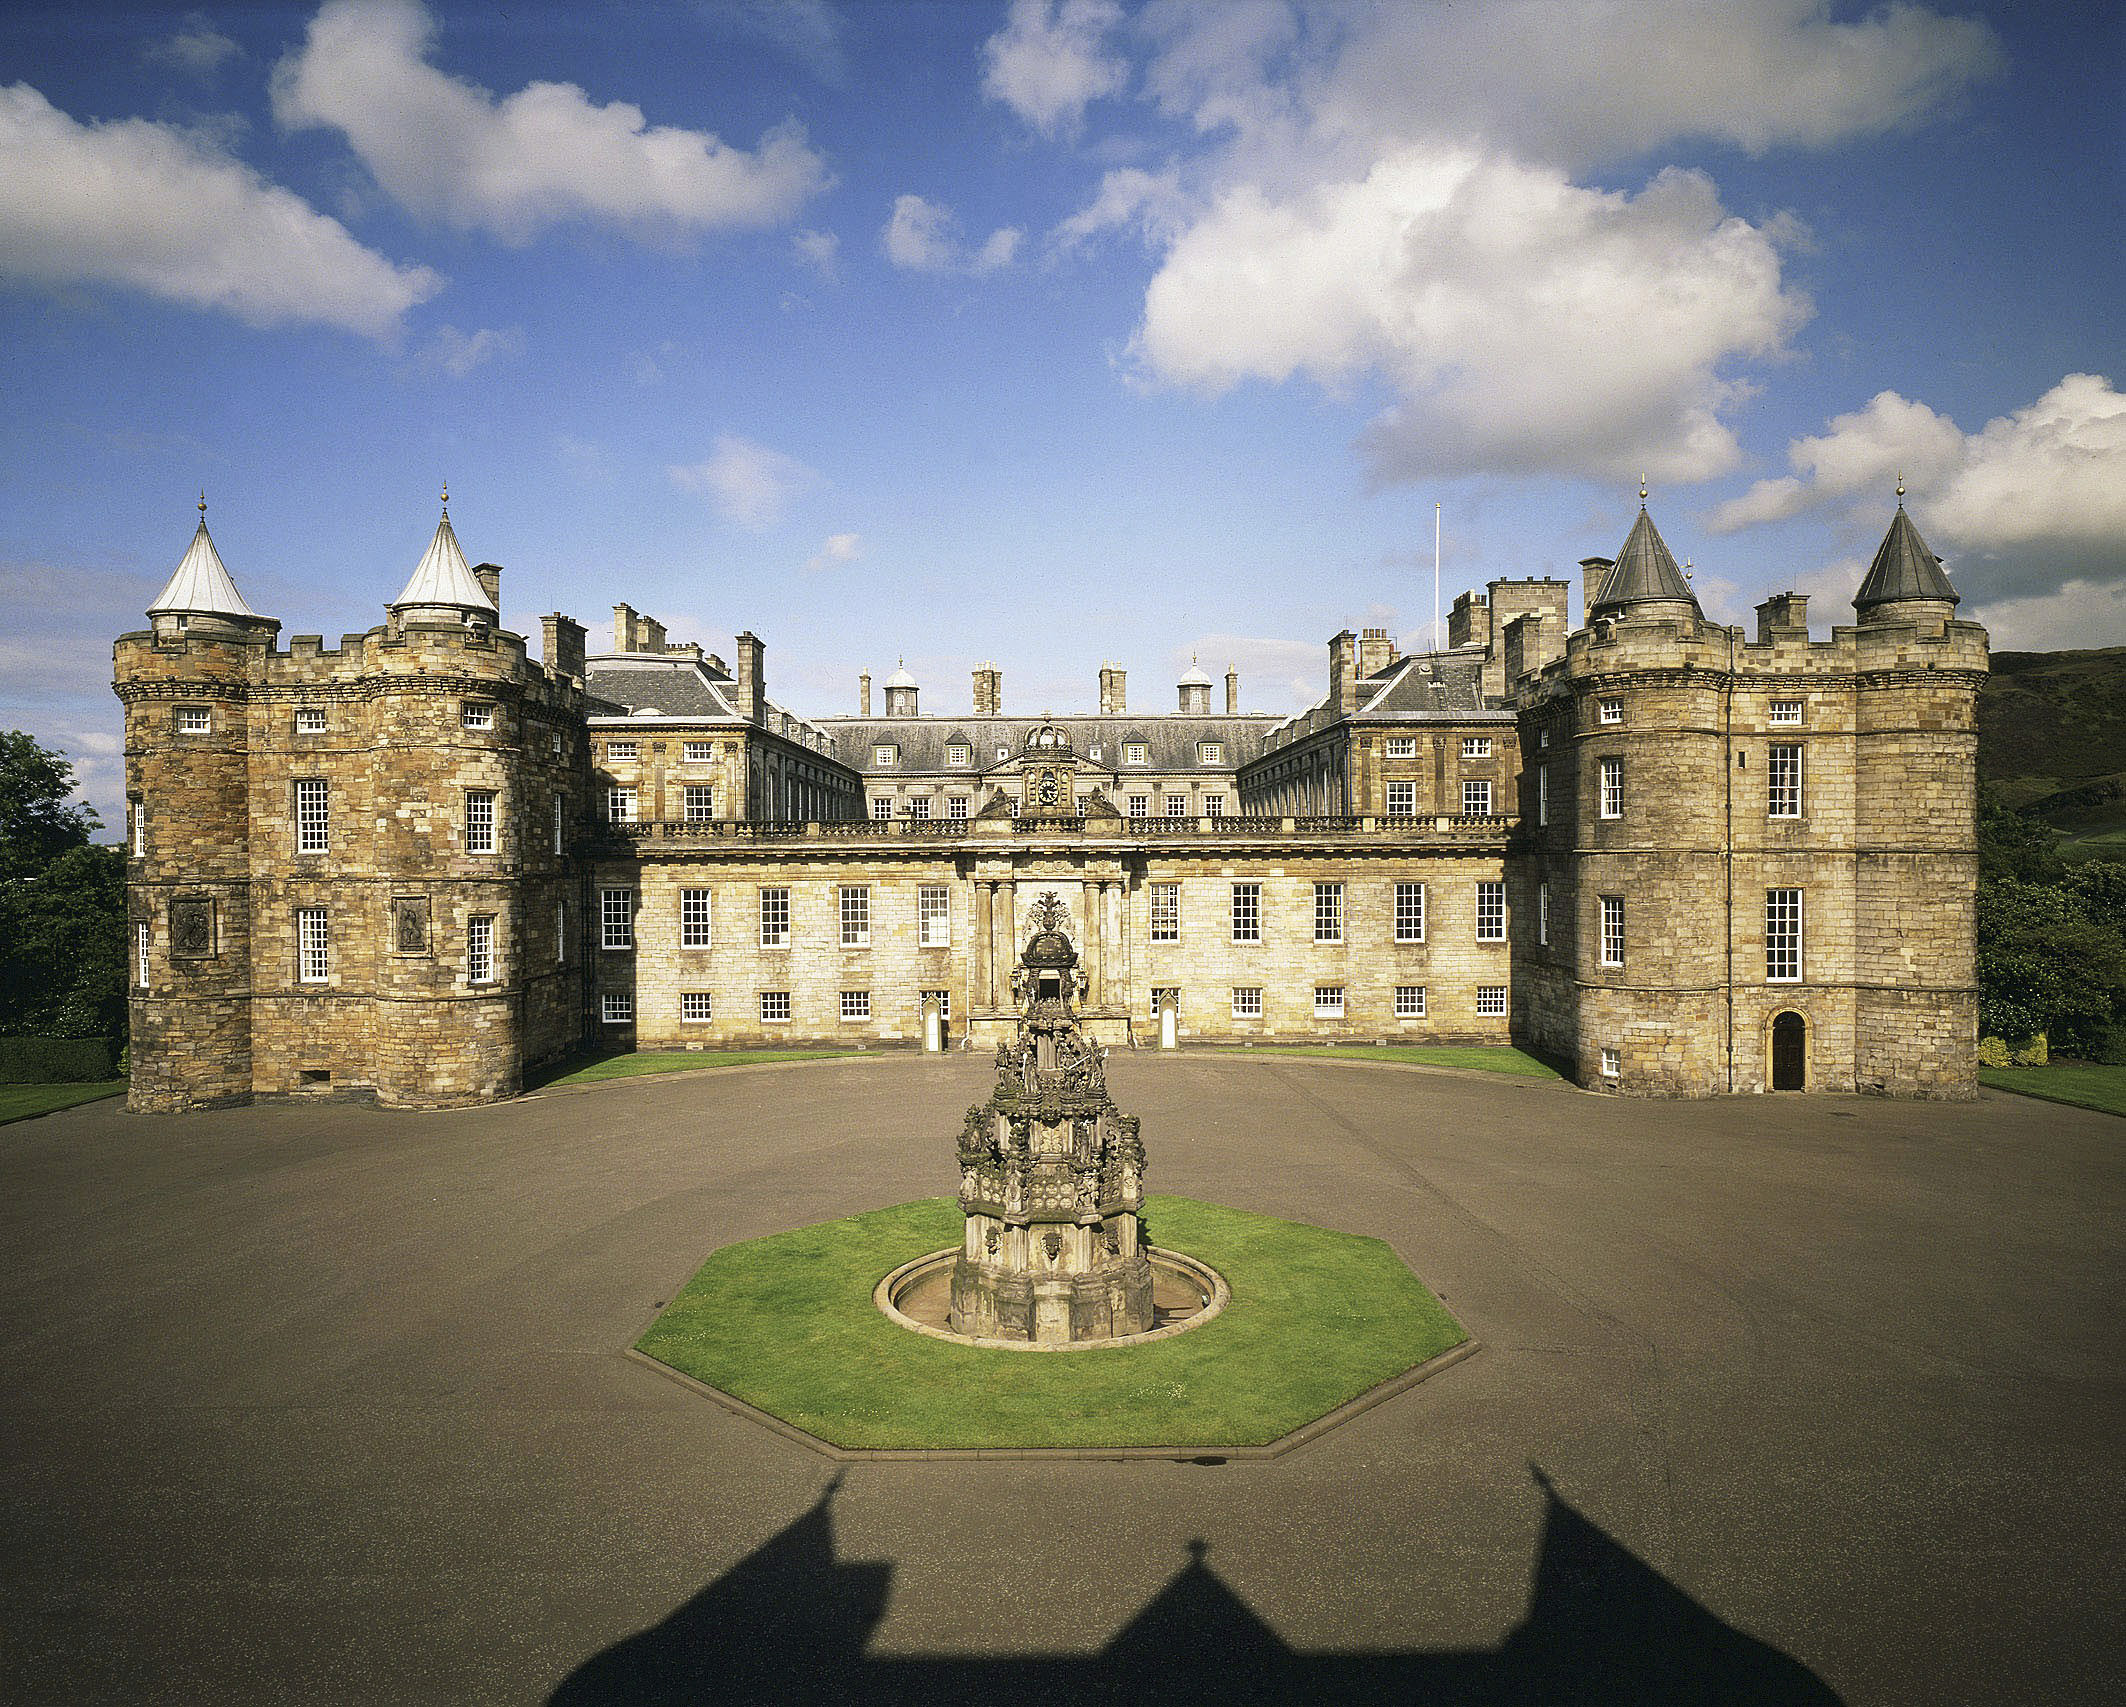 Discover the rich history of famous Scottish Royals at Holyrood Palace. Plan your visit to majestic Holyroodhouse Palace in Edinburgh, Scotland. Photo Credit - Royal Collection Trust / © Her Majesty Queen Elizabeth II 2018